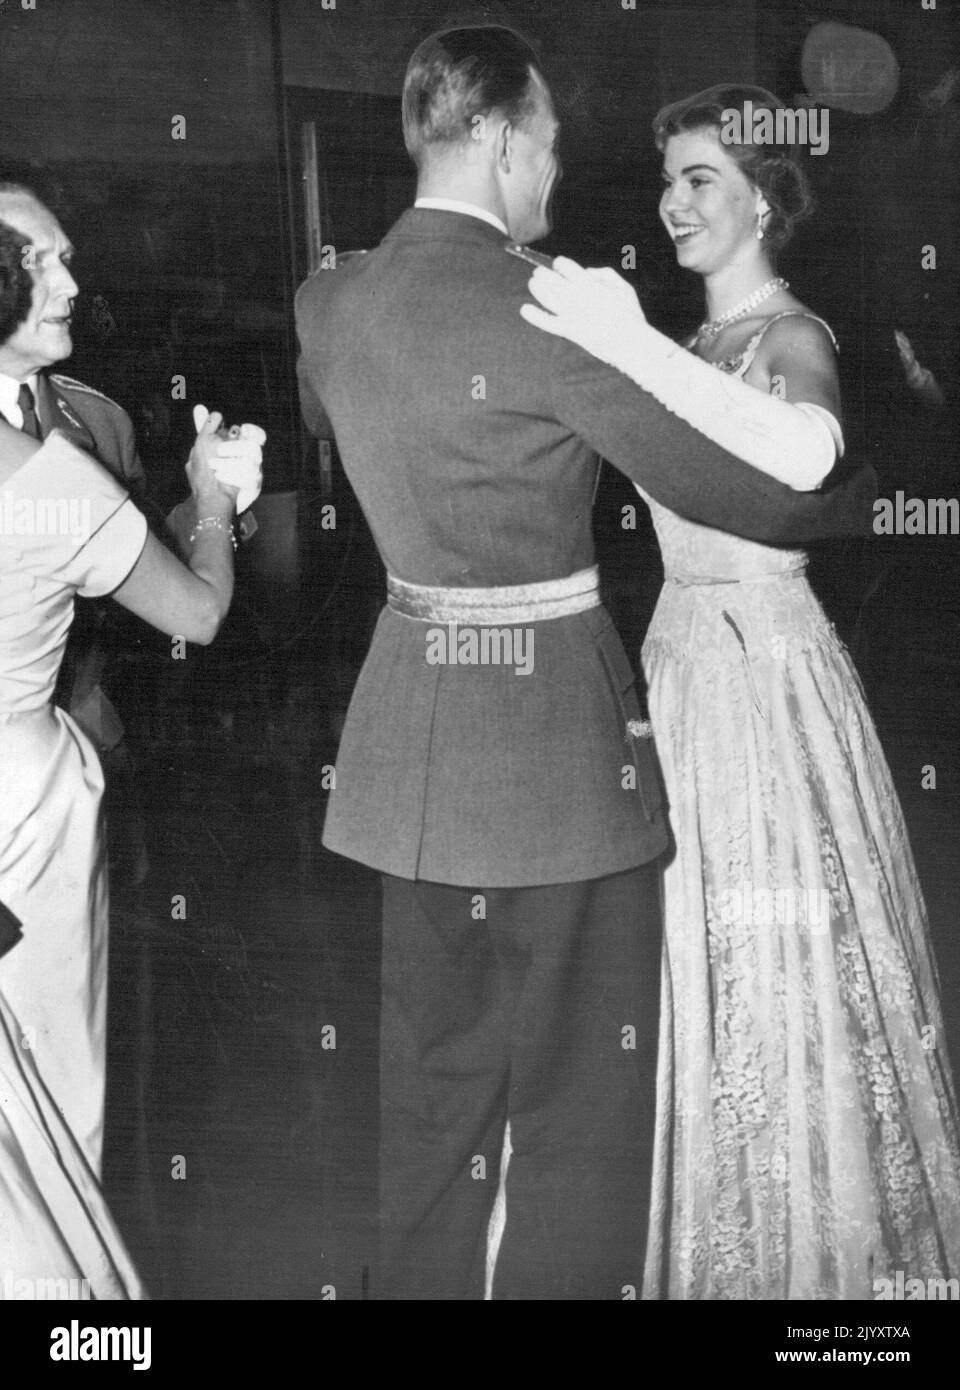 Swedish Princess at cadet ball: Princess Margaretha of Sweden went to the annual cadet ball at the Military school at Karlberg castle, Stockholm, for the first time recently. Photo shows: Princess Margaretha dancing the cadet Lars Sjodahl. High inks in mayfair celebrated the state visit of the King and Queen of Sweden. Their grand-daughter Princess Margaretha, aged 19, went on from an official banquet at the Swedish embassy to a private party, then to a nightclub where she danced until four-thirty in the morning to the music played by the yawning members of a band officially off duty an hour b Stock Photo